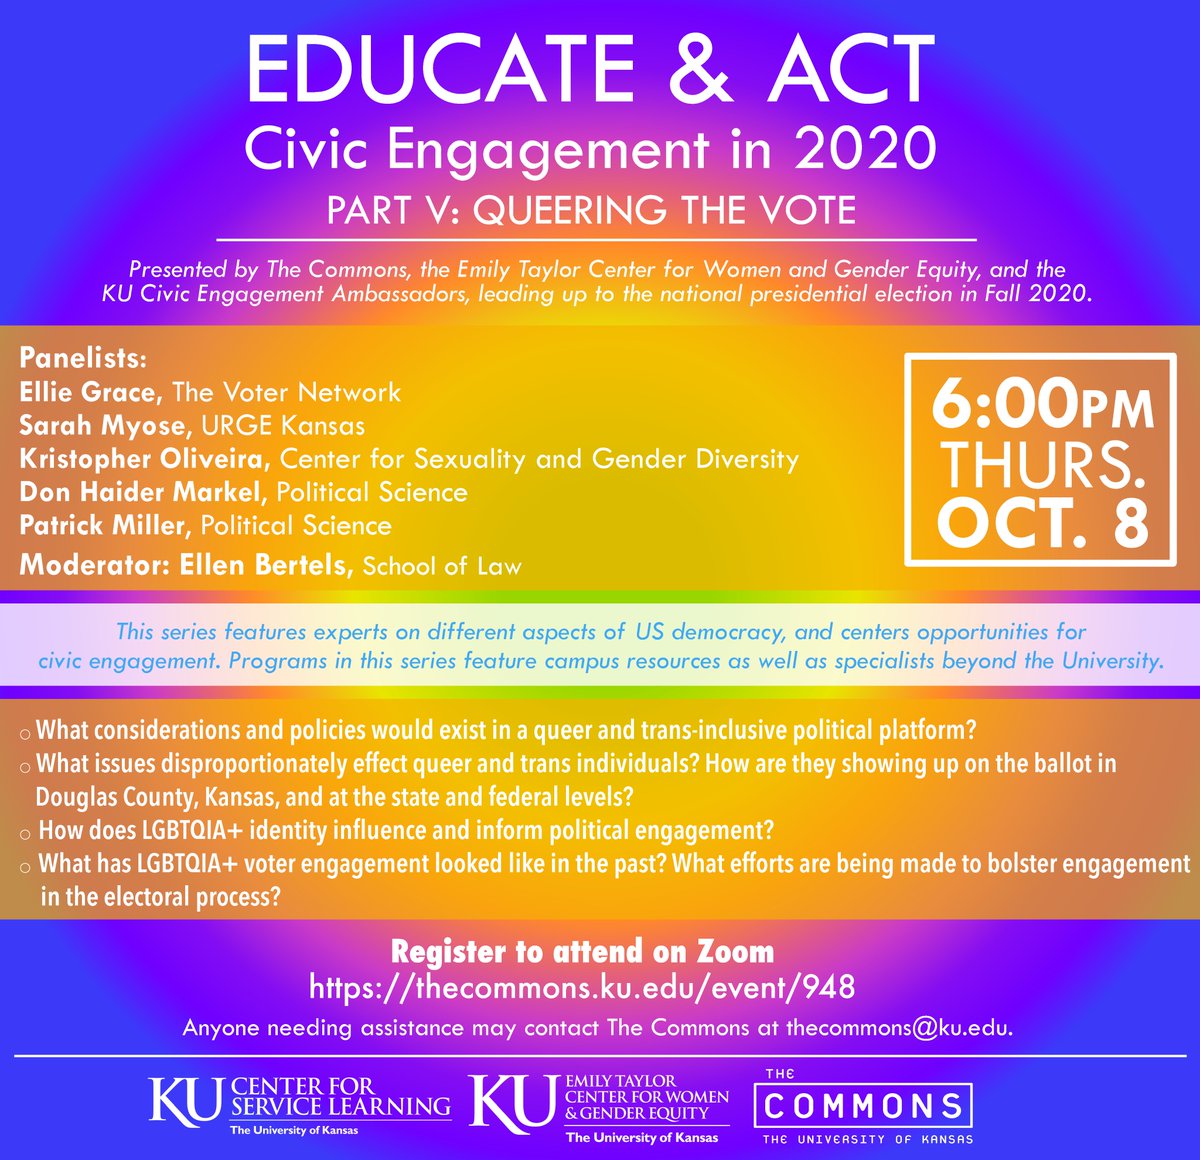 Next week is KU Serves Week/National Voter Education Week! Join The Commons, KU Center for Service Learning, and Emily Taylor Center for Women & Gender Equity for Parts IV and V in our series EDUCATE & ACT: CIVIC ENGAGEMENT IN 2020: The Feminist Agenda & Queering the Vote.